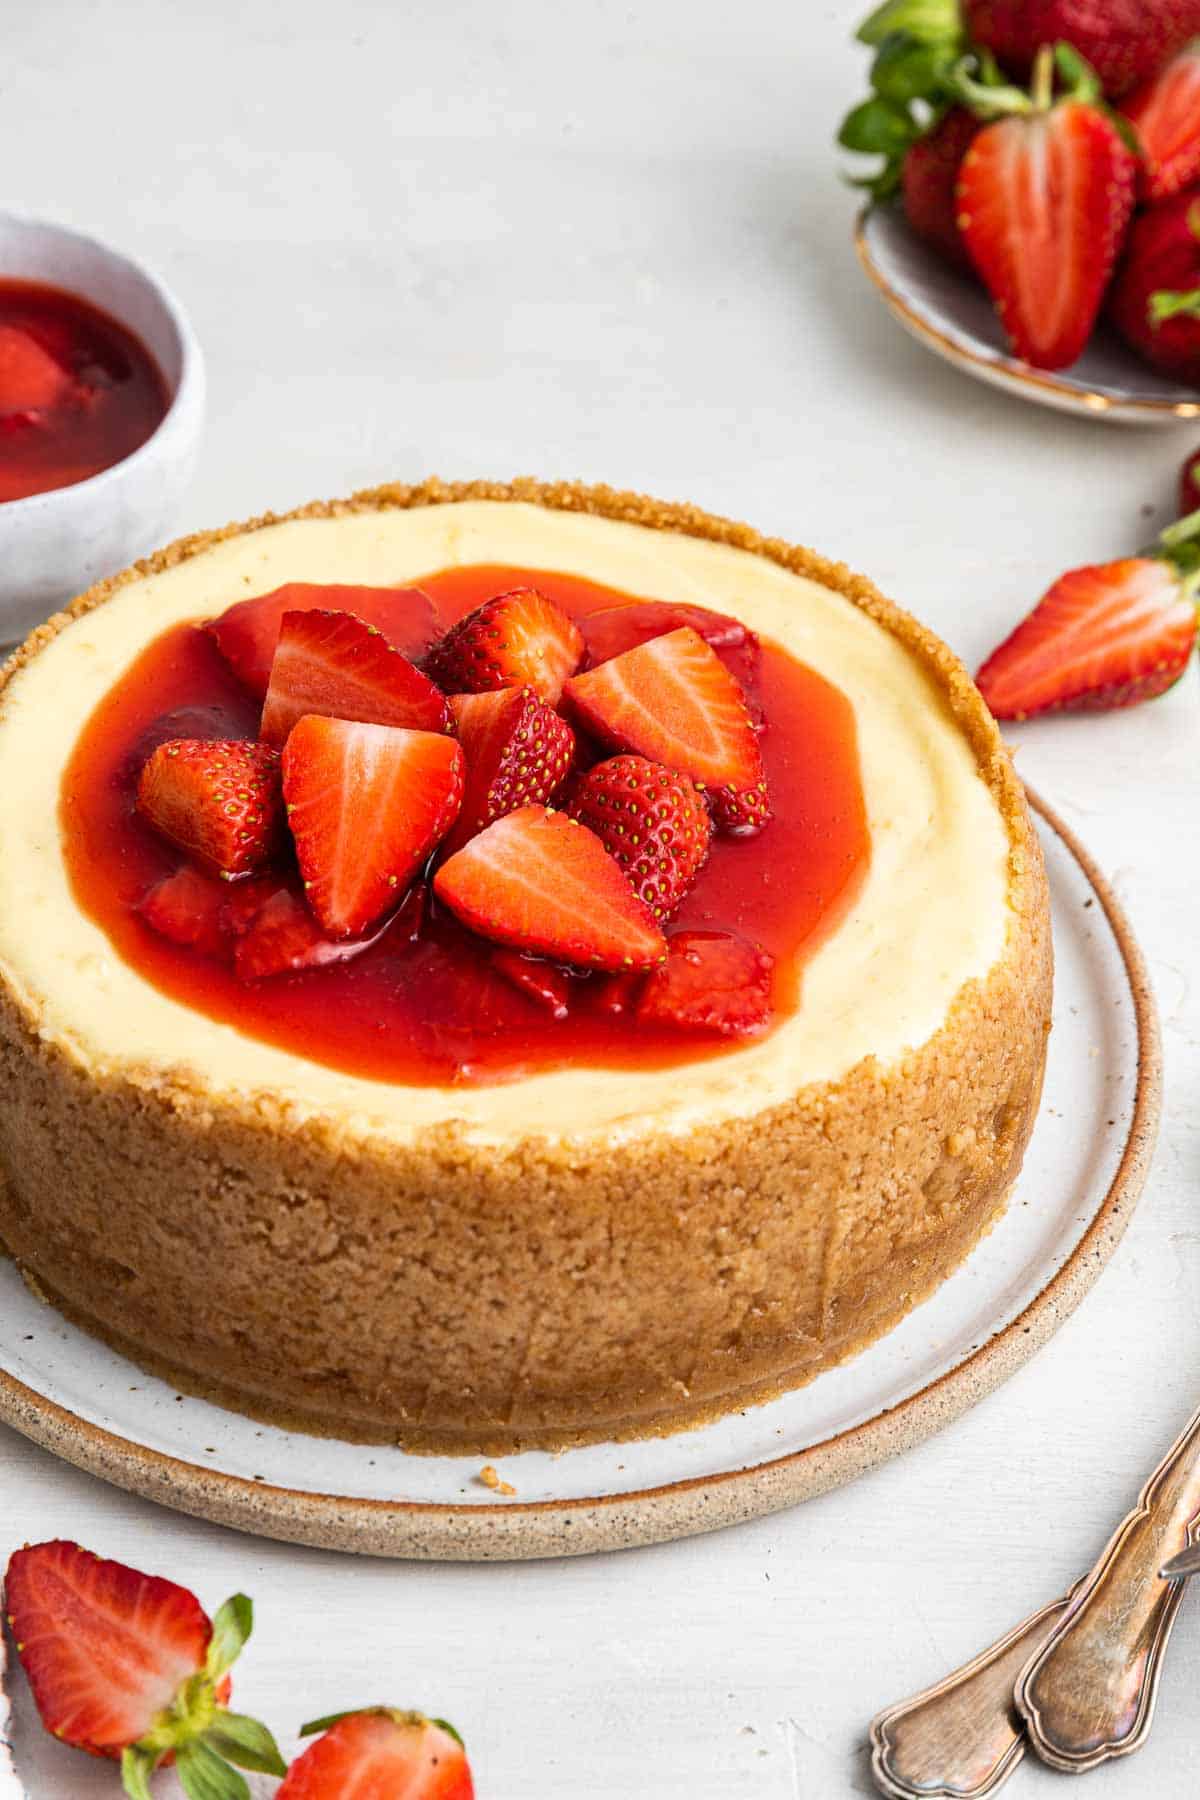 How to Remove Cheesecake from Springform Pan - Life Love and Sugar